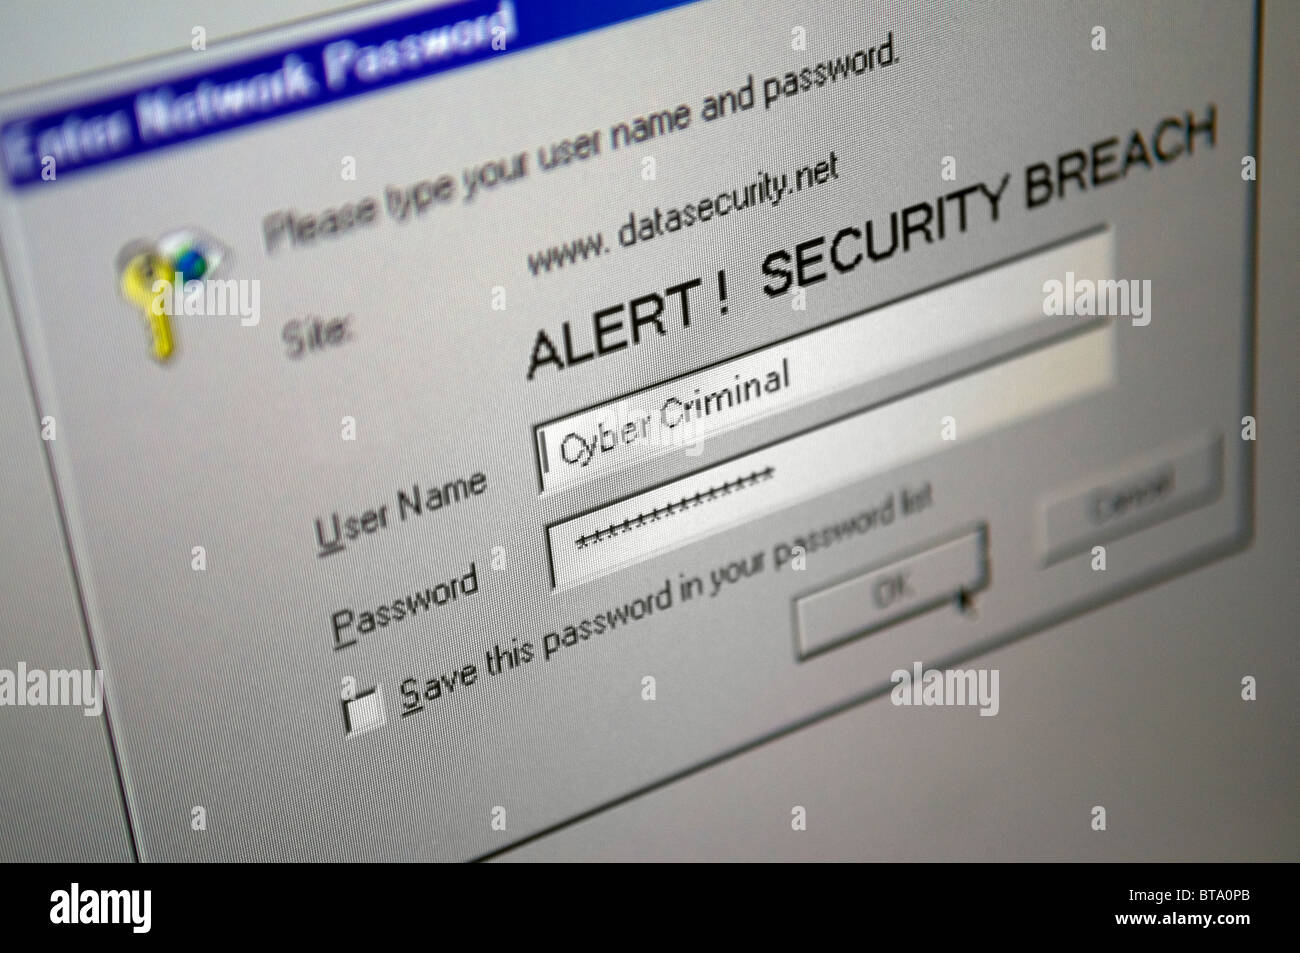 computer screen with network security alert Stock Photo